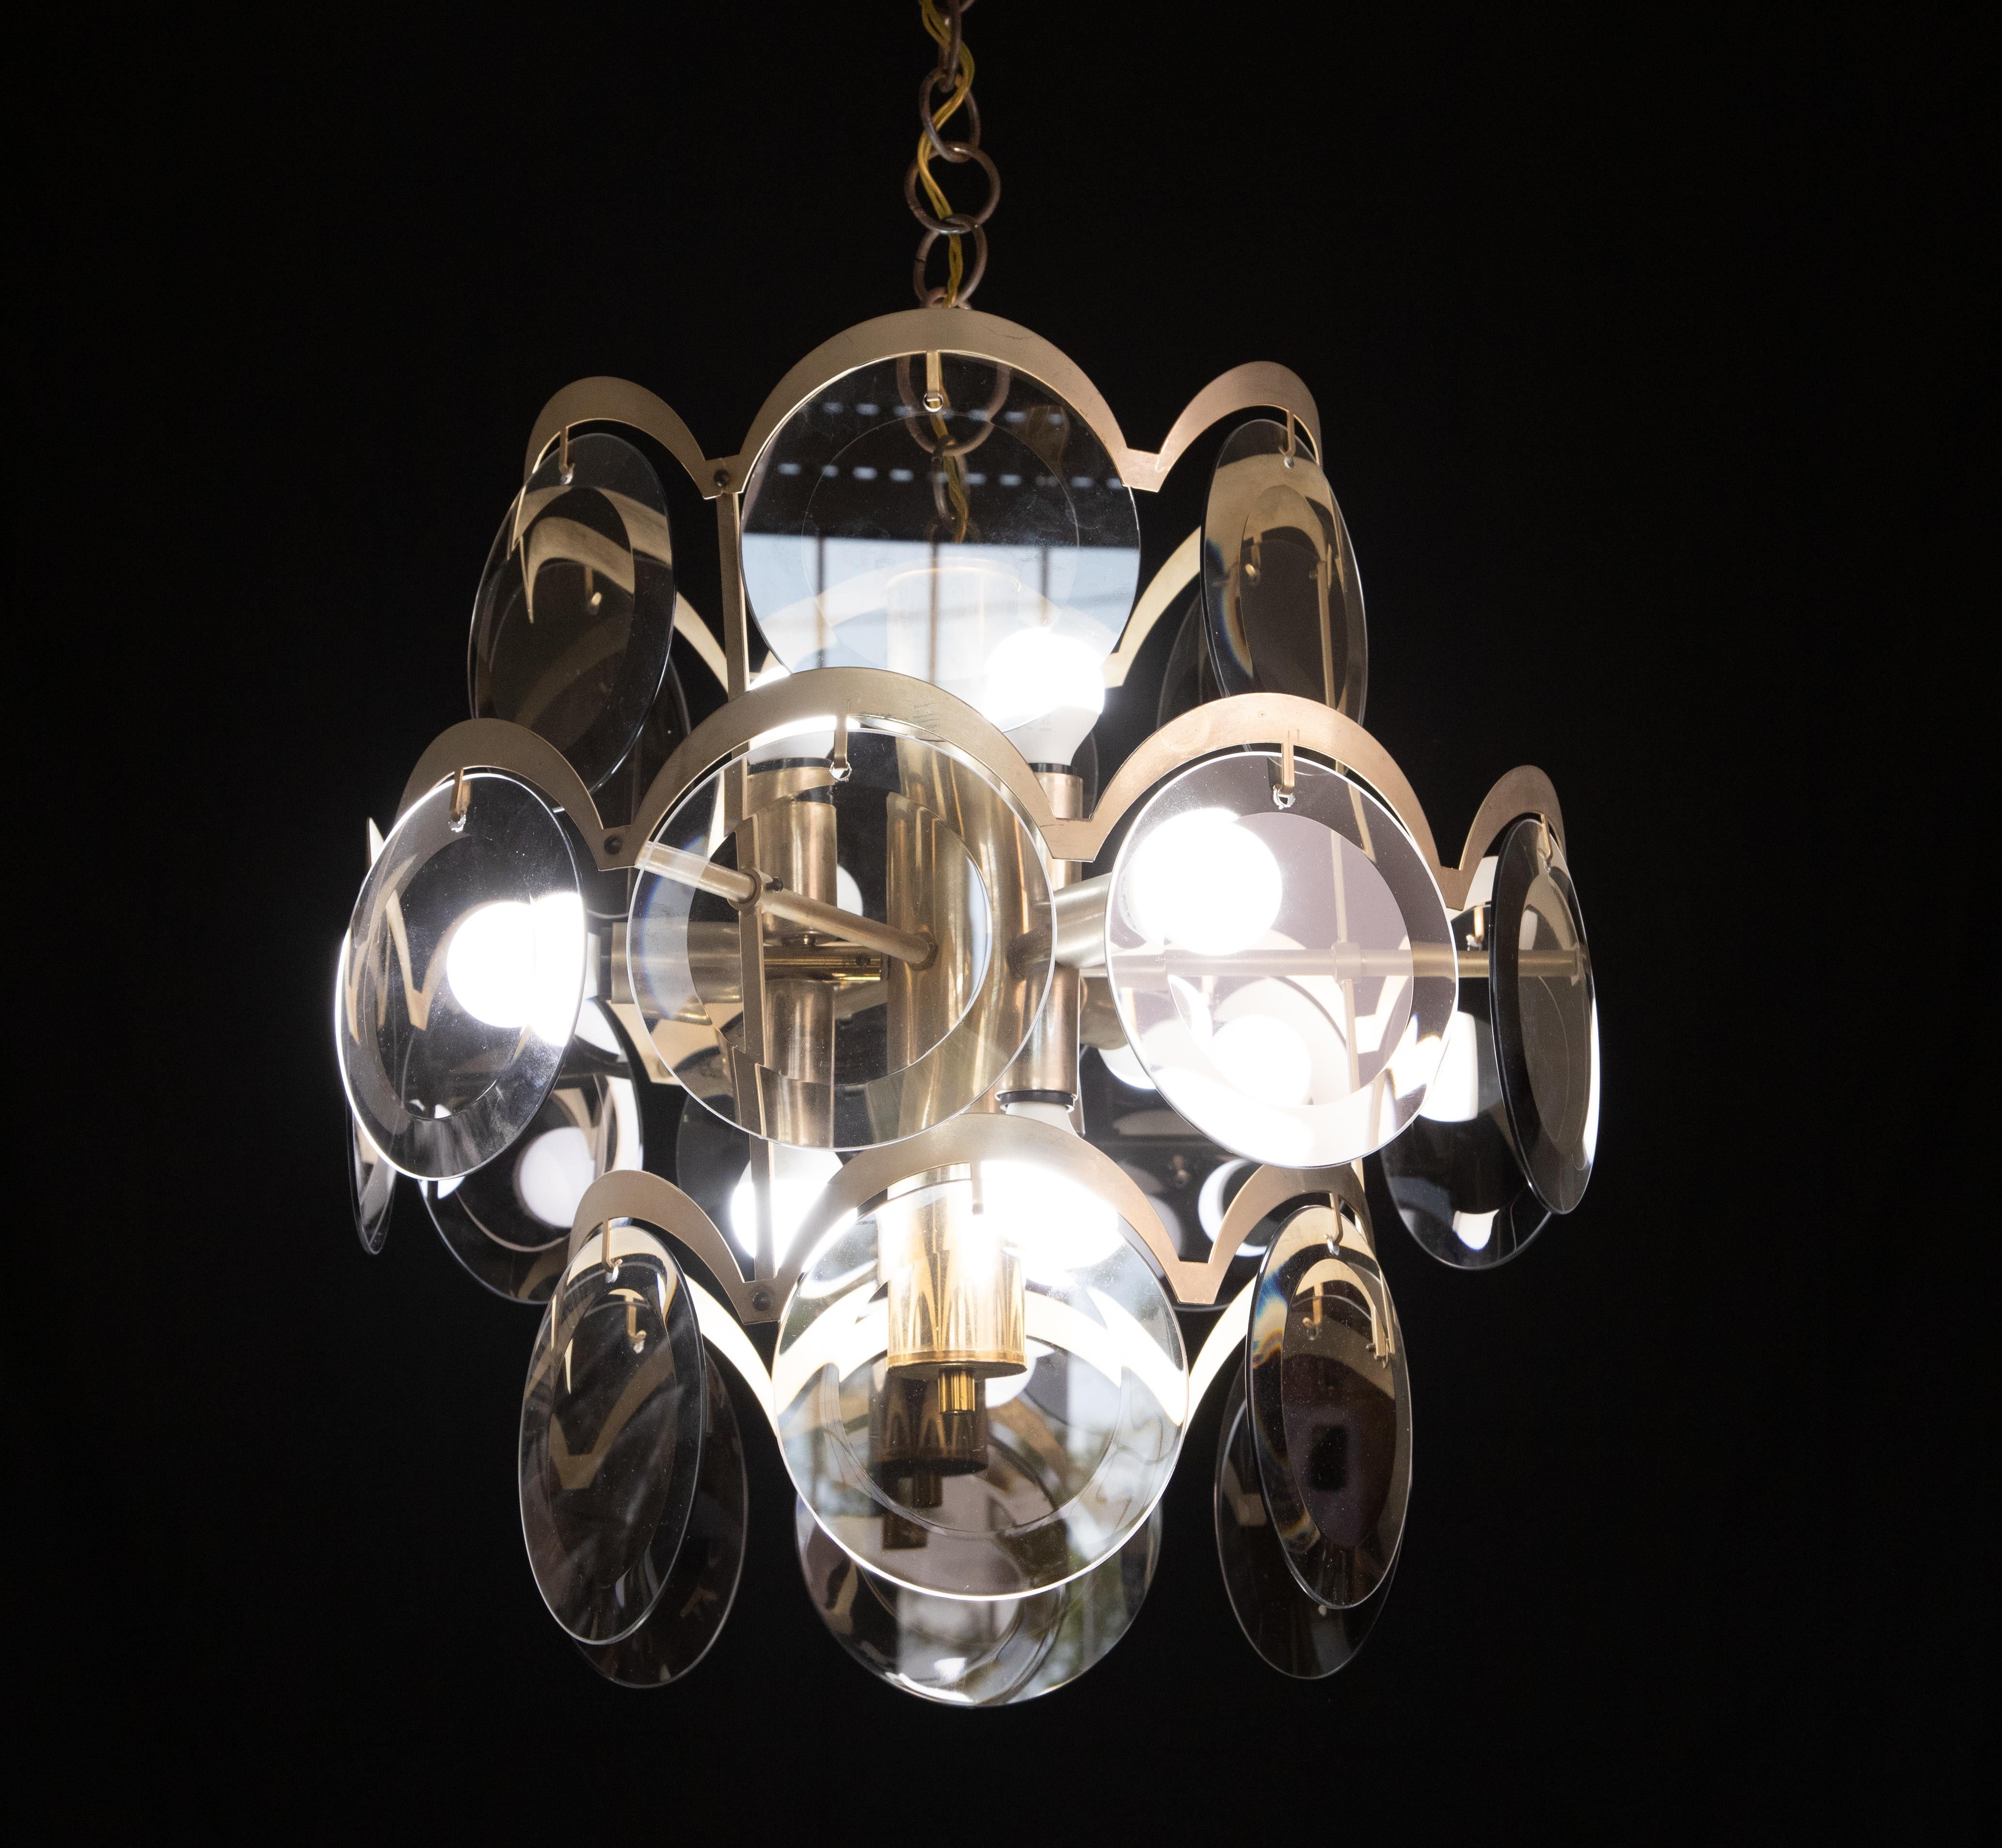 Vintage Italian chandelier with three tiers of smoked glass discs mounted on a brass frame, with a crescent-shaped brass arch above each disc / Designed and made by VIstosi in Italy, circa 1960
9 lights or E14
Measurements: diameter 55 inches,